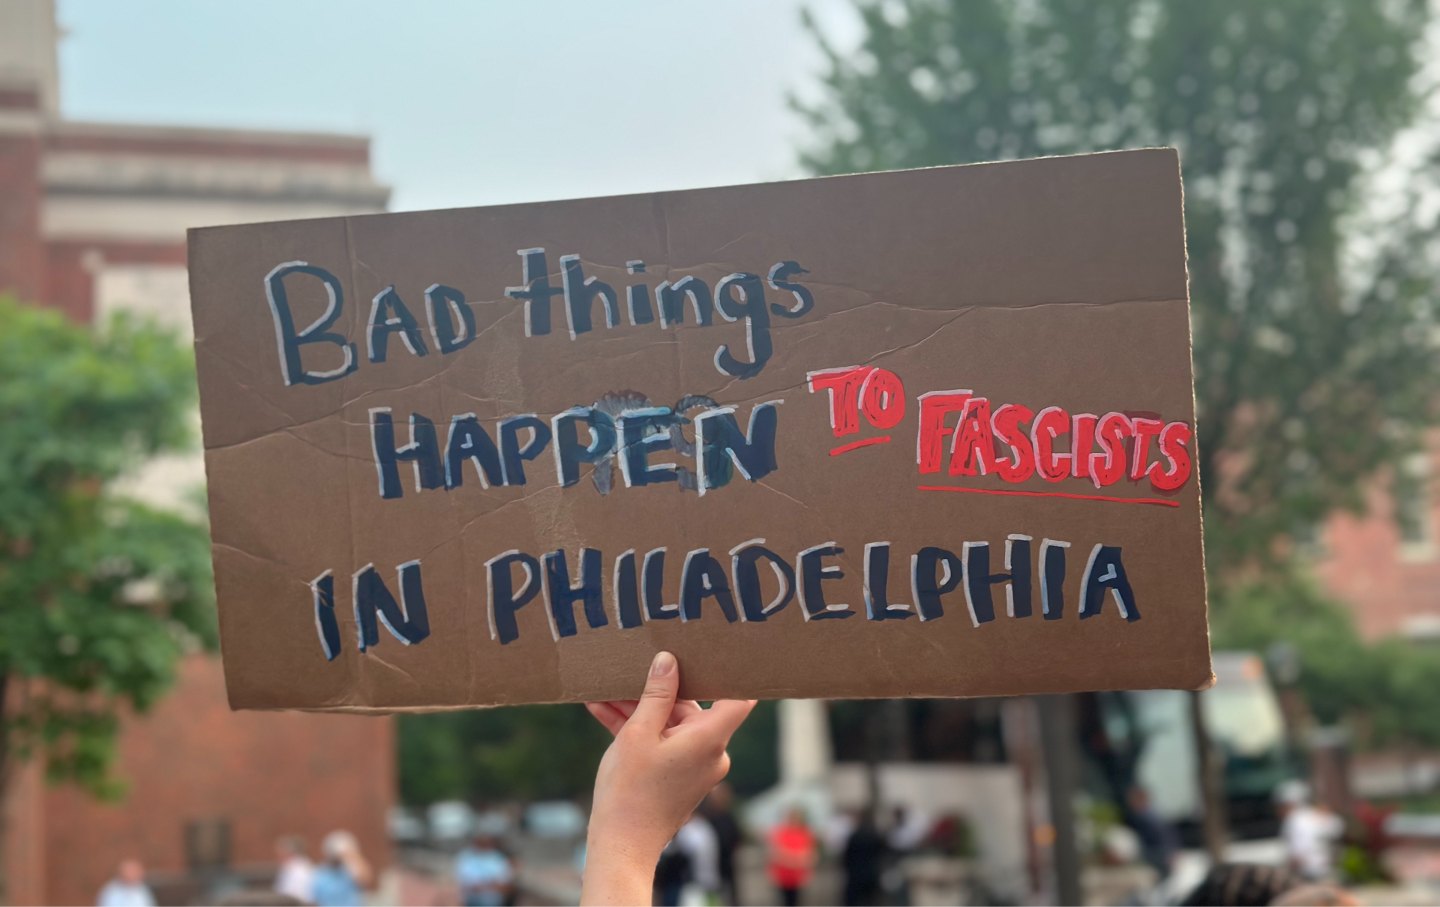 Moms for Liberty Came to Philly. Philly Came for Them.